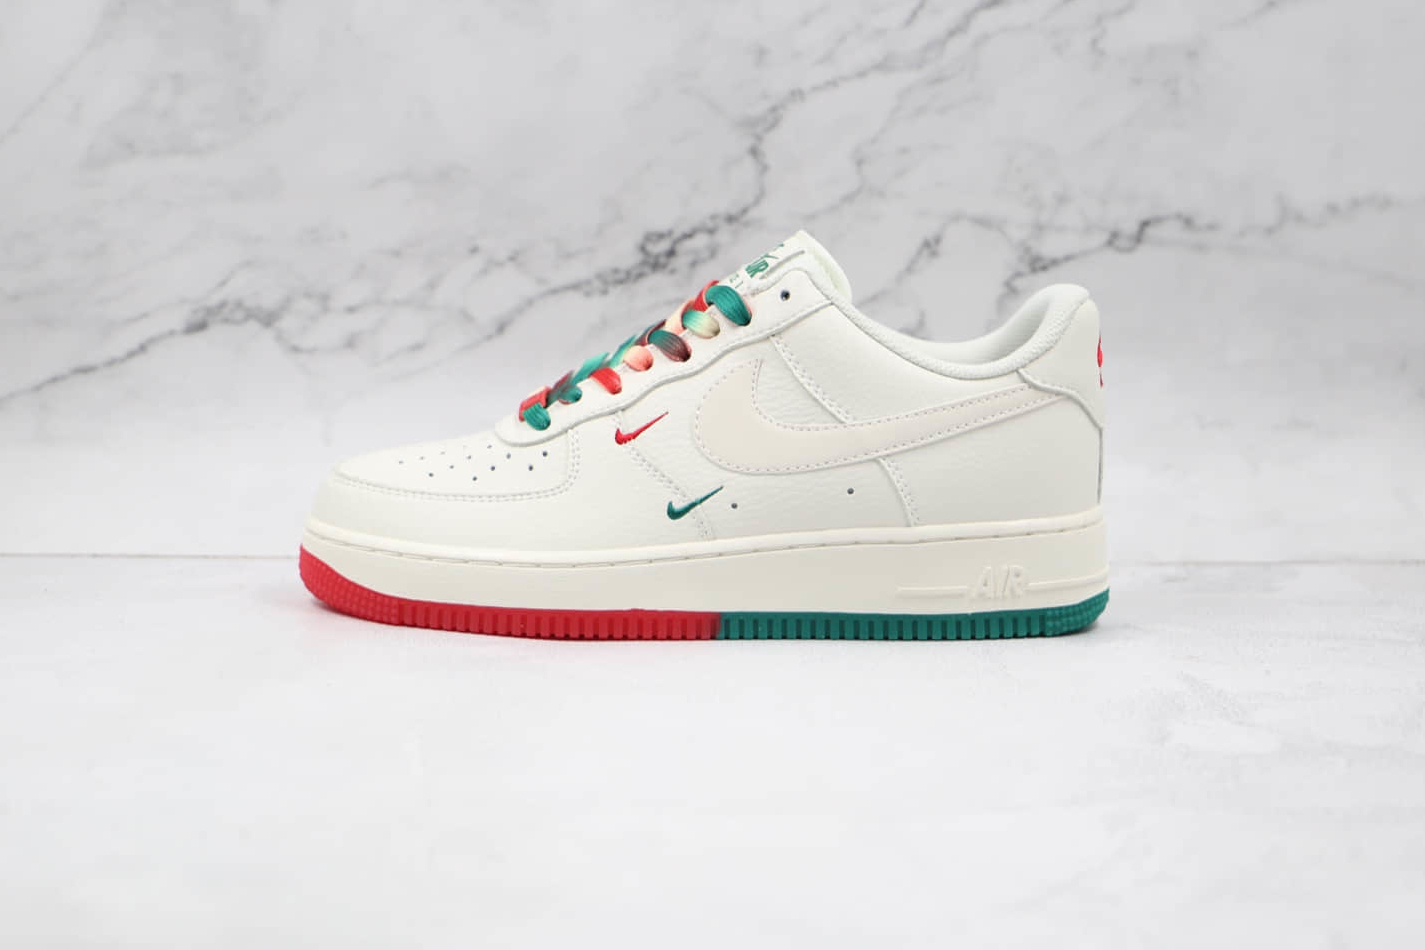 Nike Air Force 1 Low 07 White Green University Red BU6638-180 - Shop Now